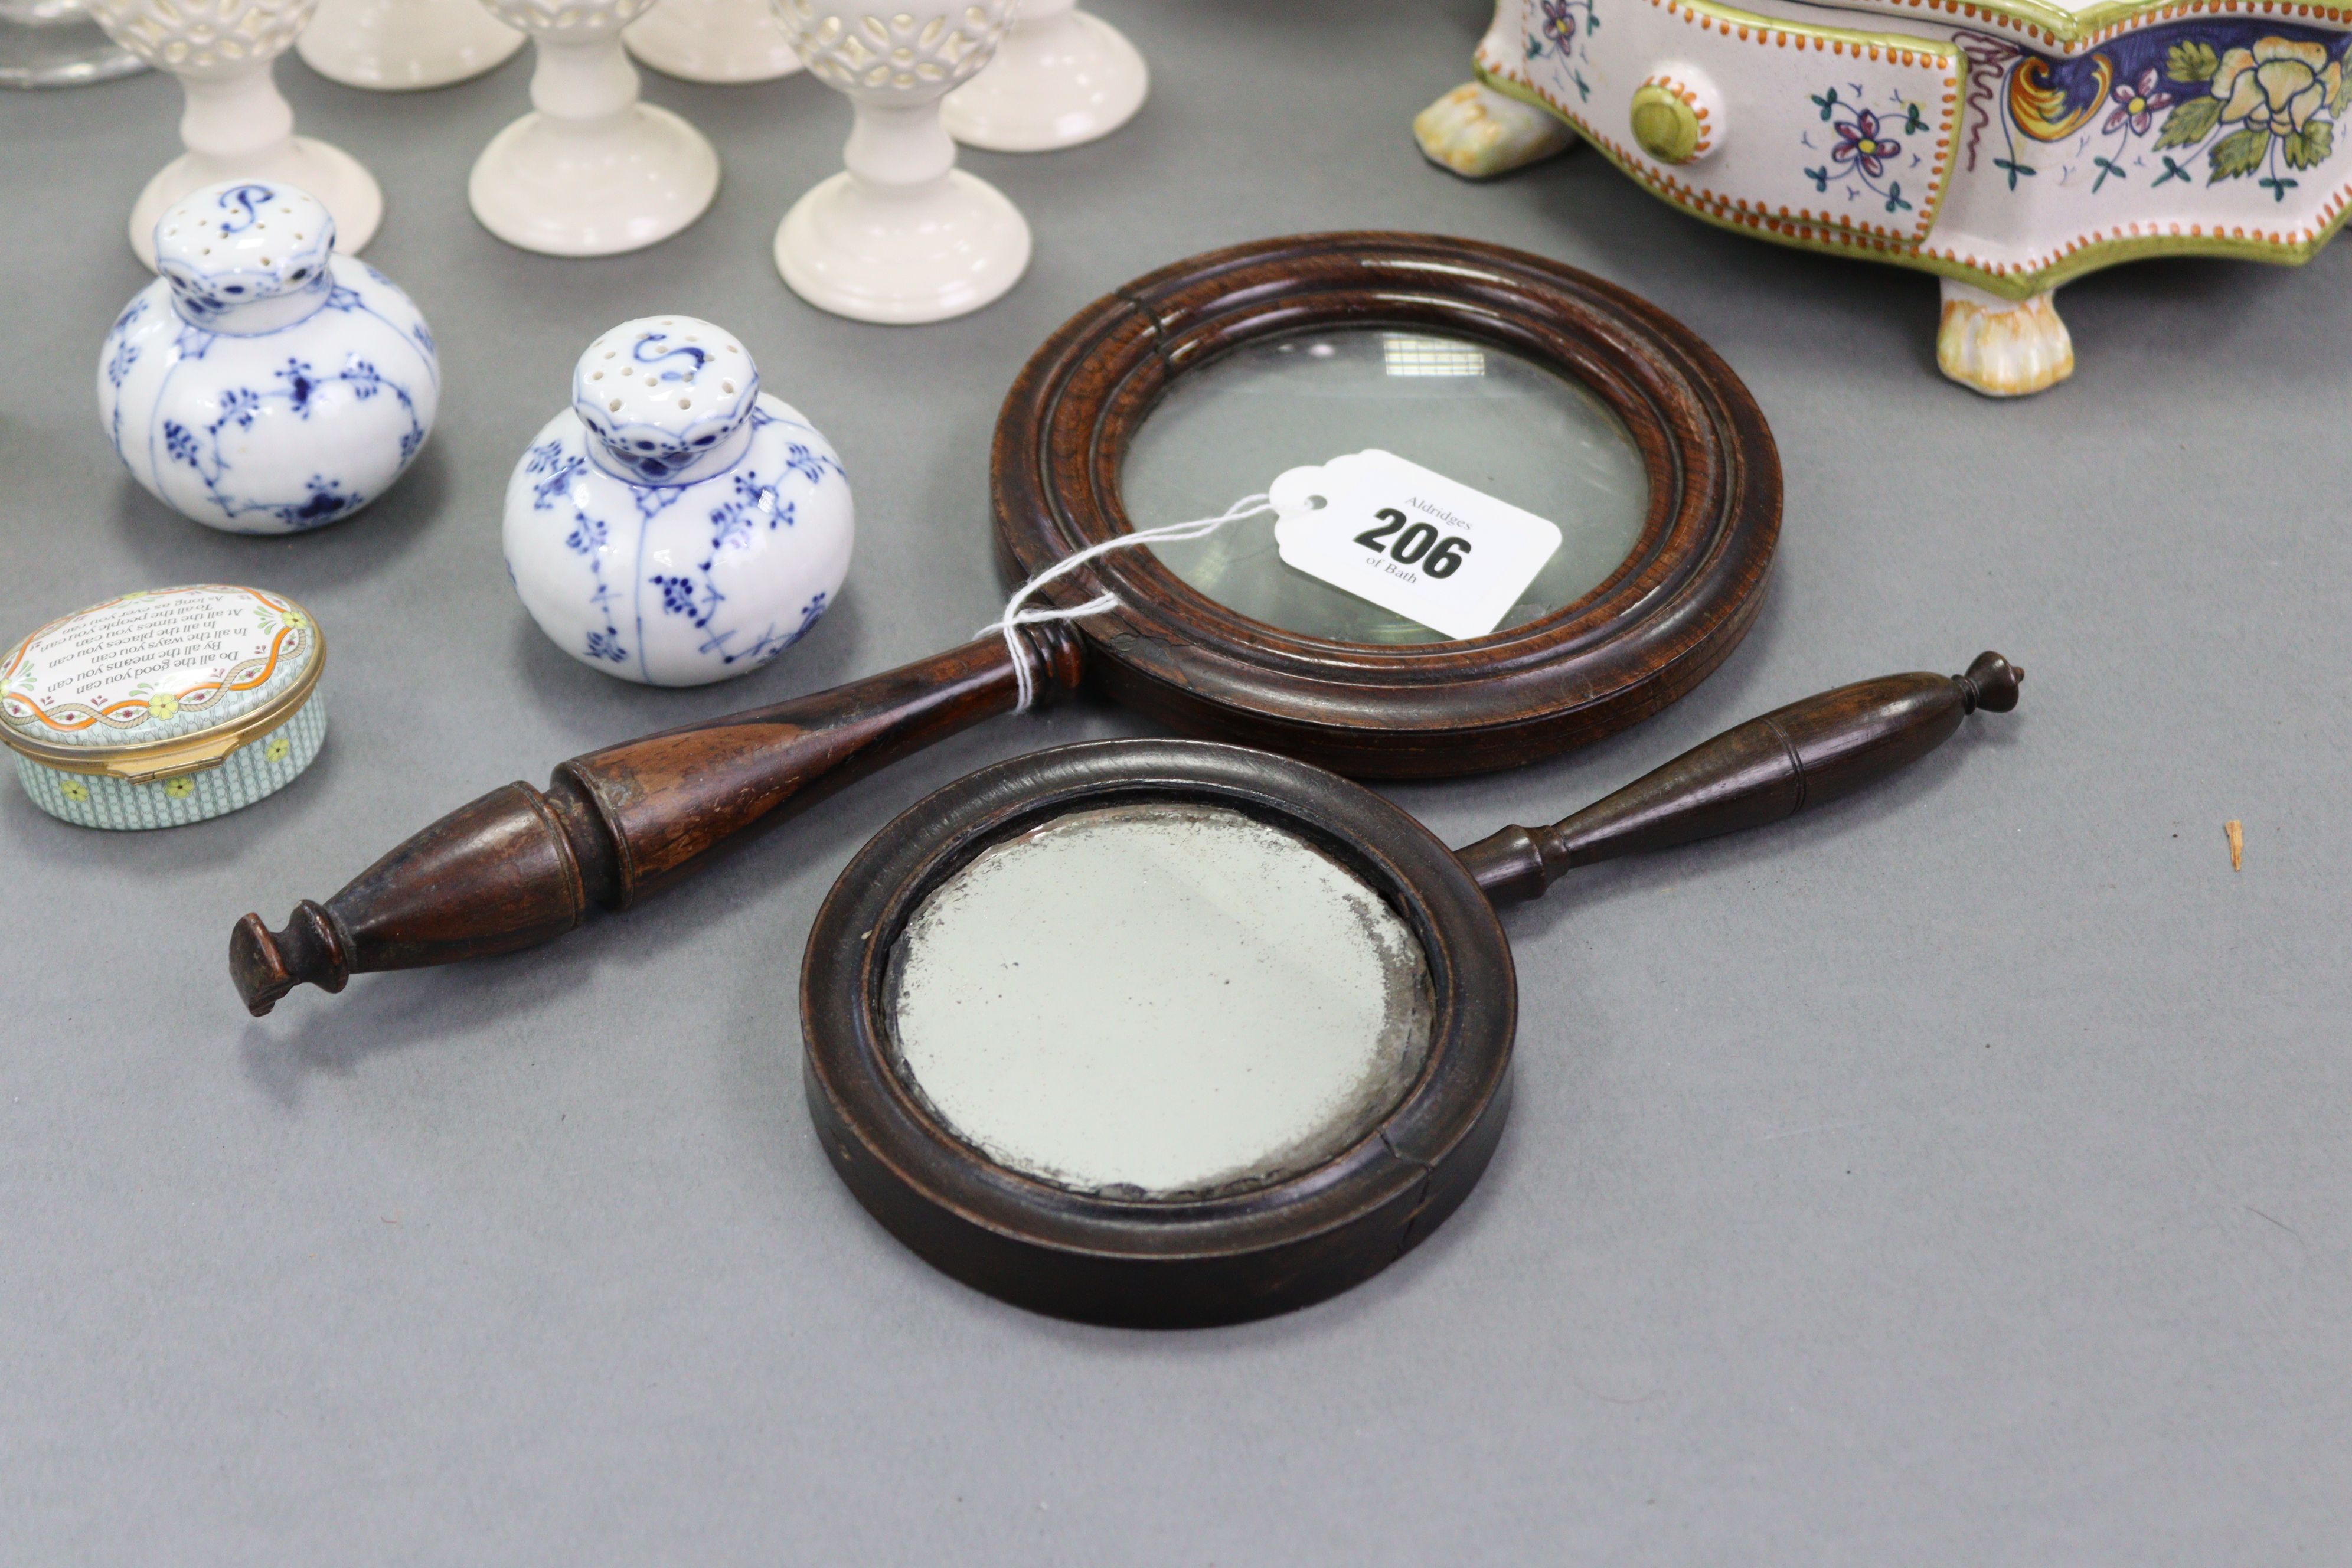 A pair of Royal Copenhagen salt & pepper pots, 2¼” high; a 19th century rosewood frame magnifying - Image 2 of 7